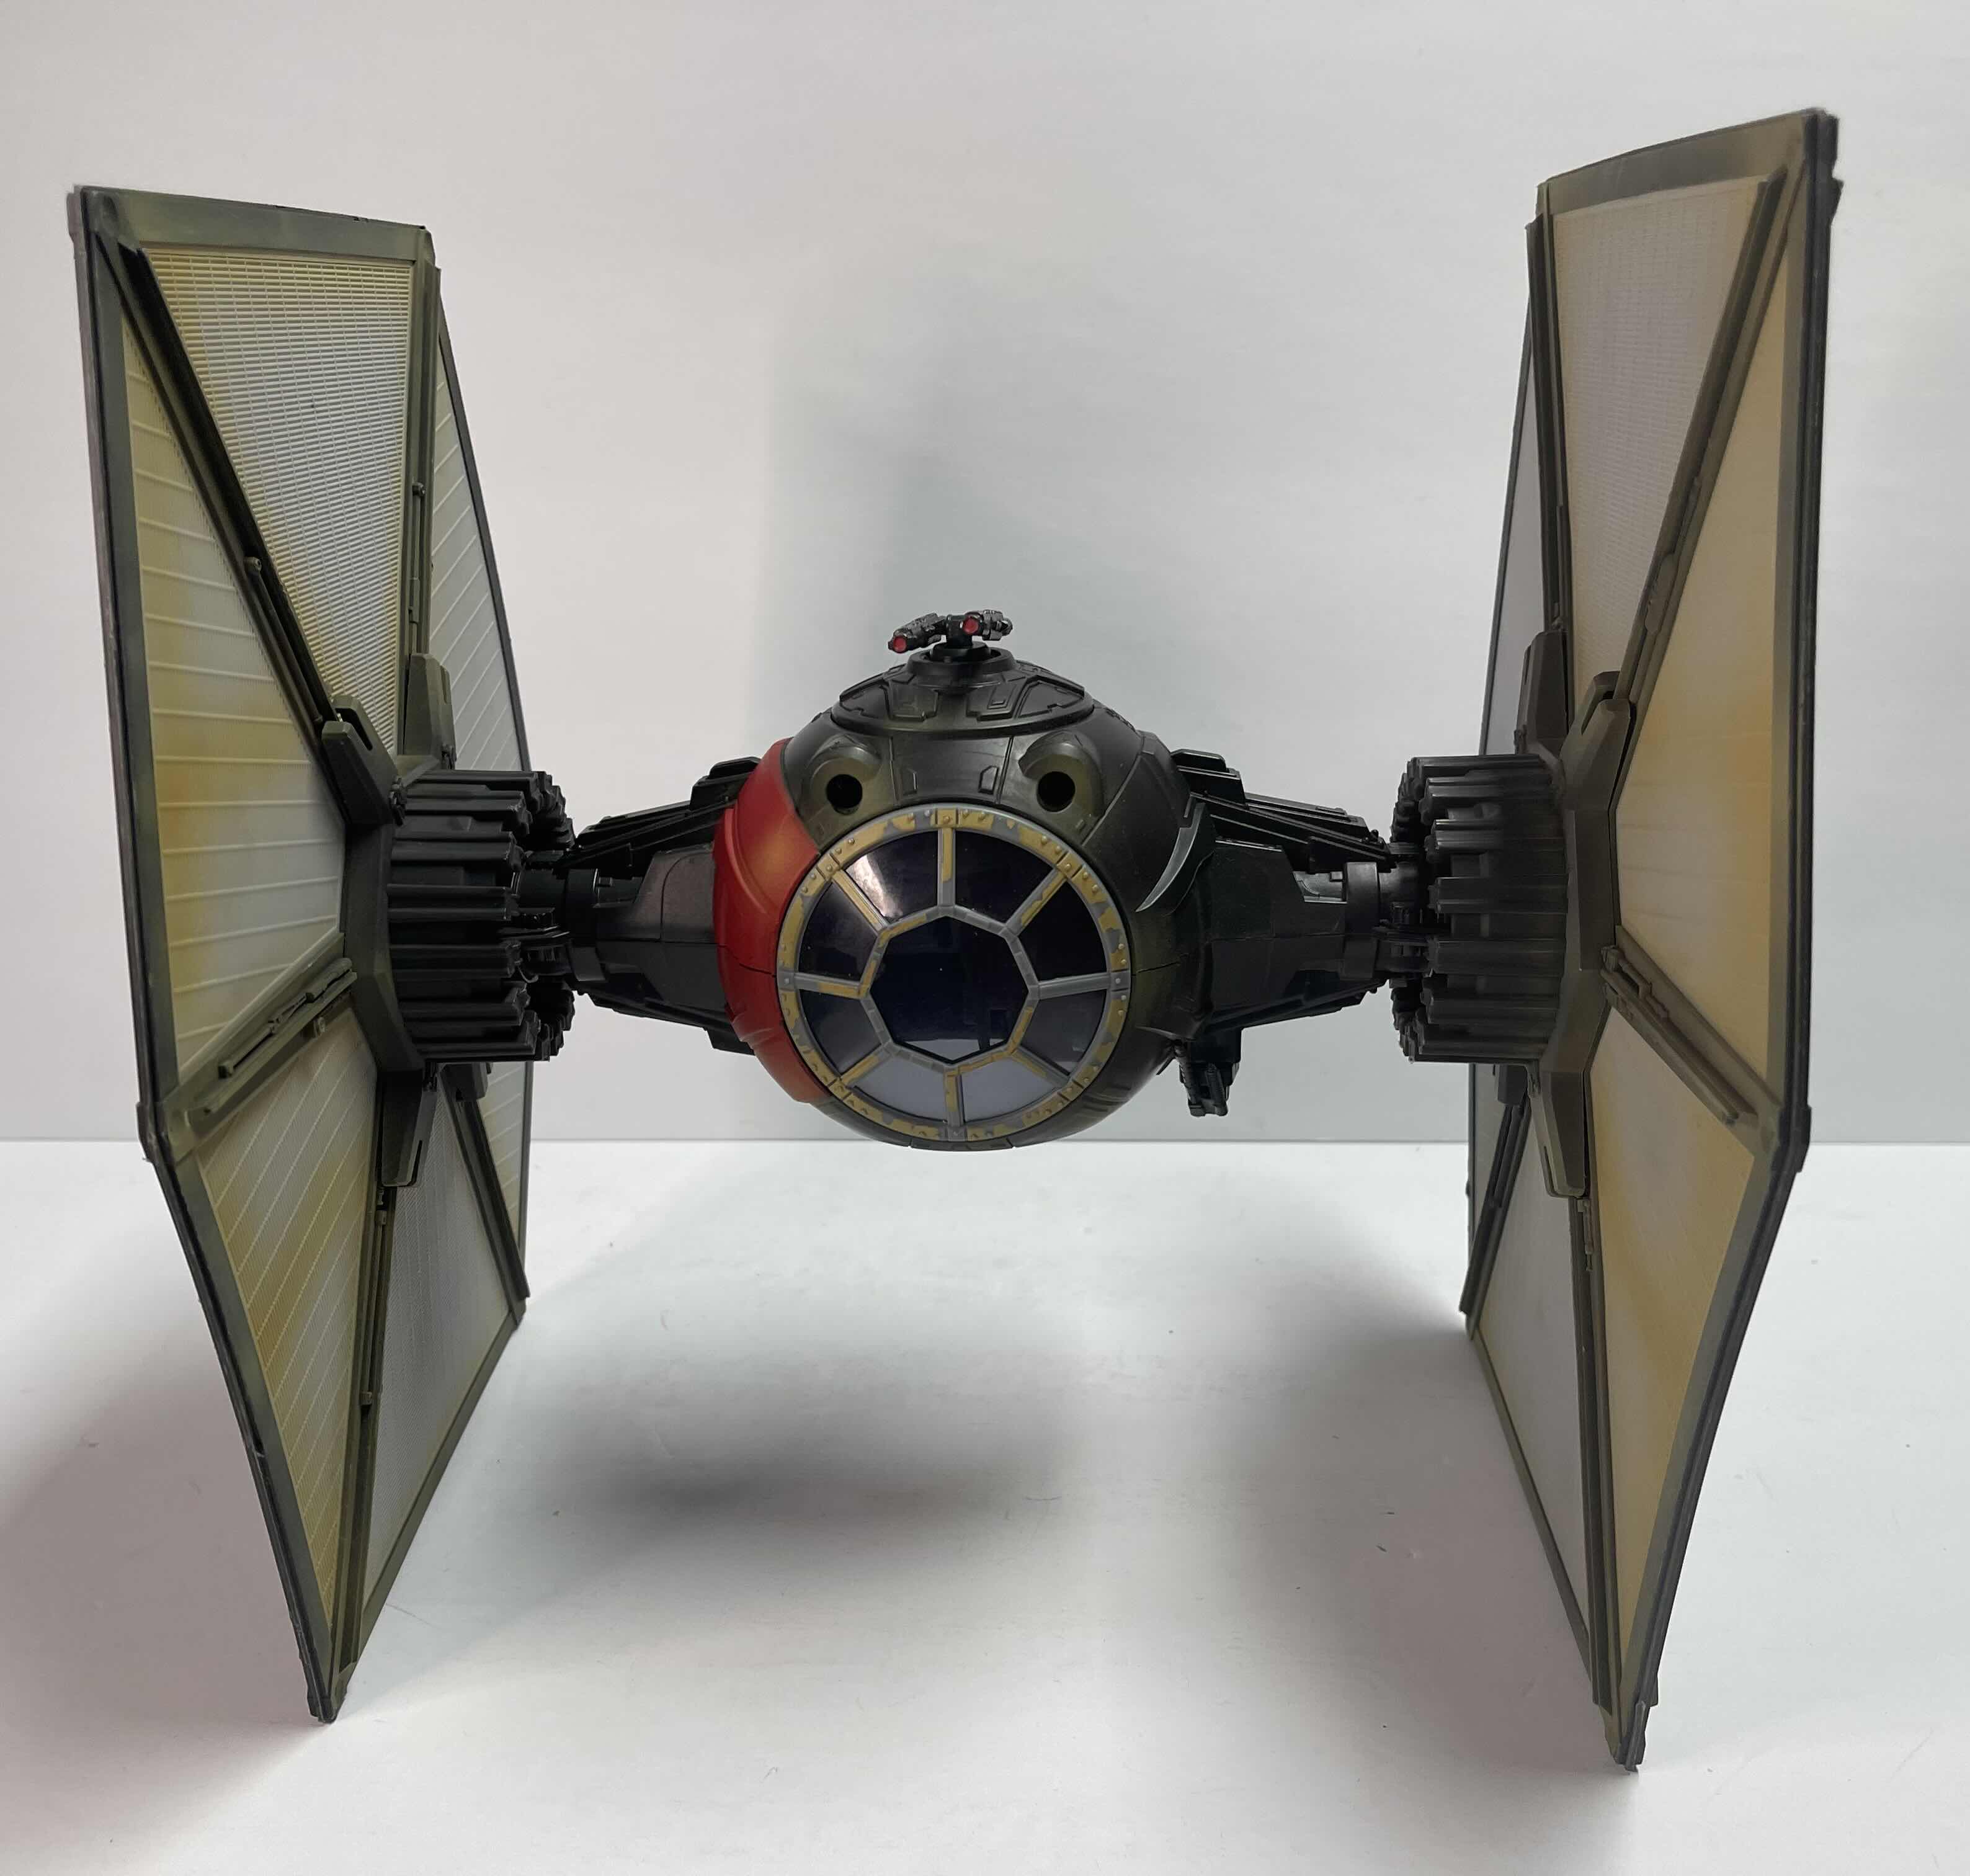 Photo 1 of 2015 HASBRO STAR WARS FIRST ORDER SPECIAL FORCES TIE FIGHTER (3 3/4 VERSION) -RETAIL VALUE $50 - SEE NOTES